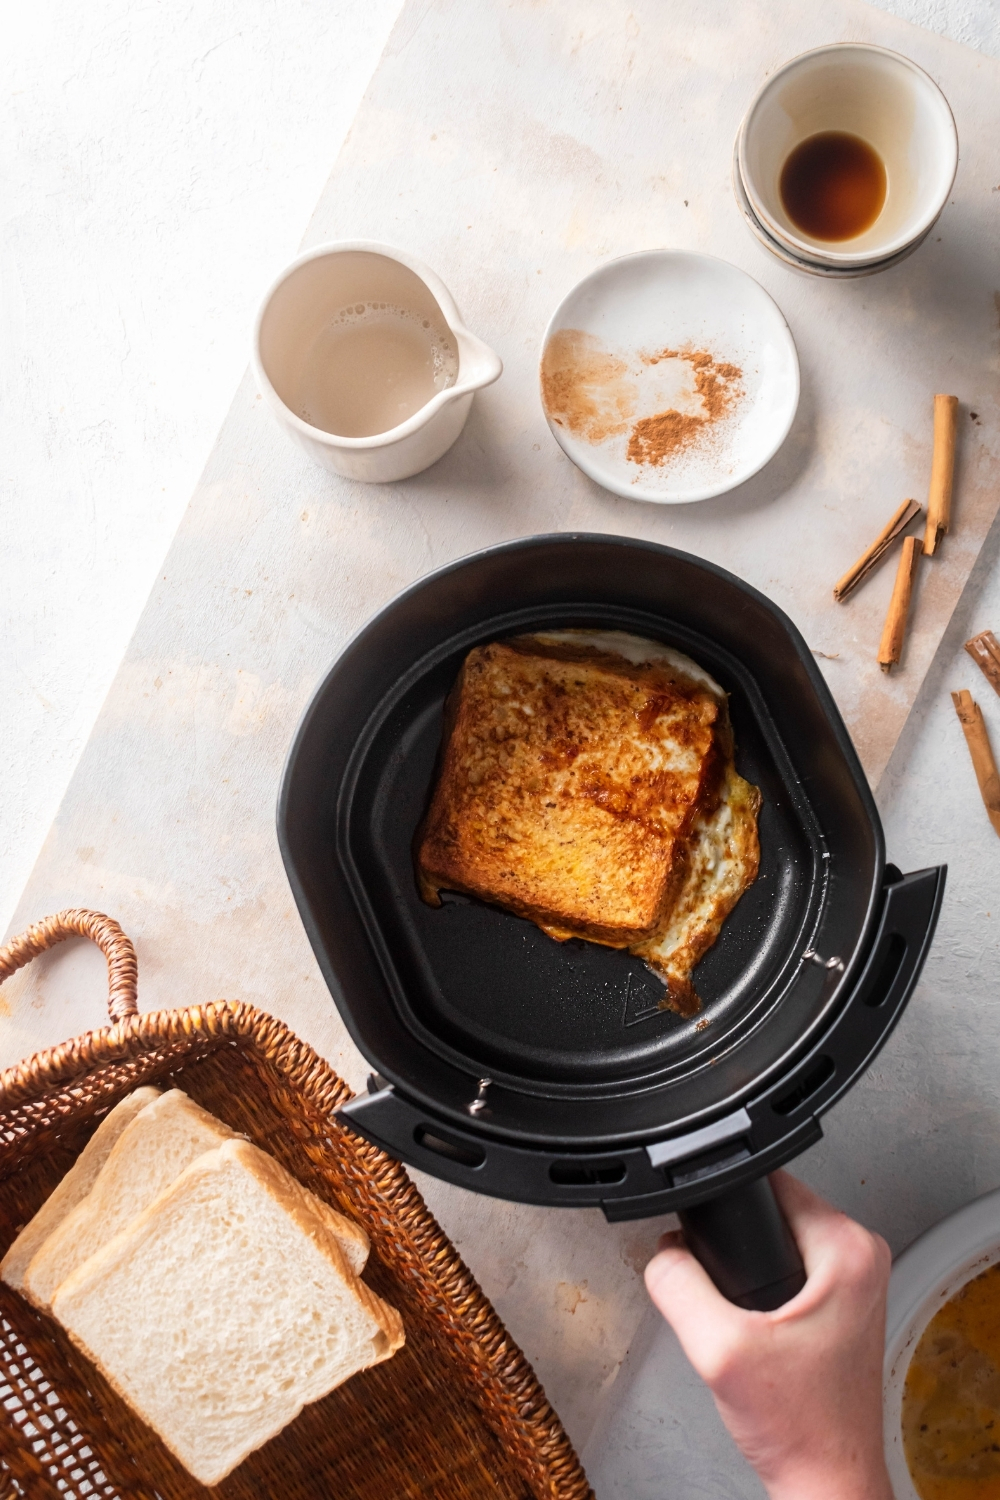 Part of the basket with three slices of bread stacked on top of each other, a piece of French toast in an air fryer, white picture, a plate with some cinnamon on it, and a white bowl on a white counter.